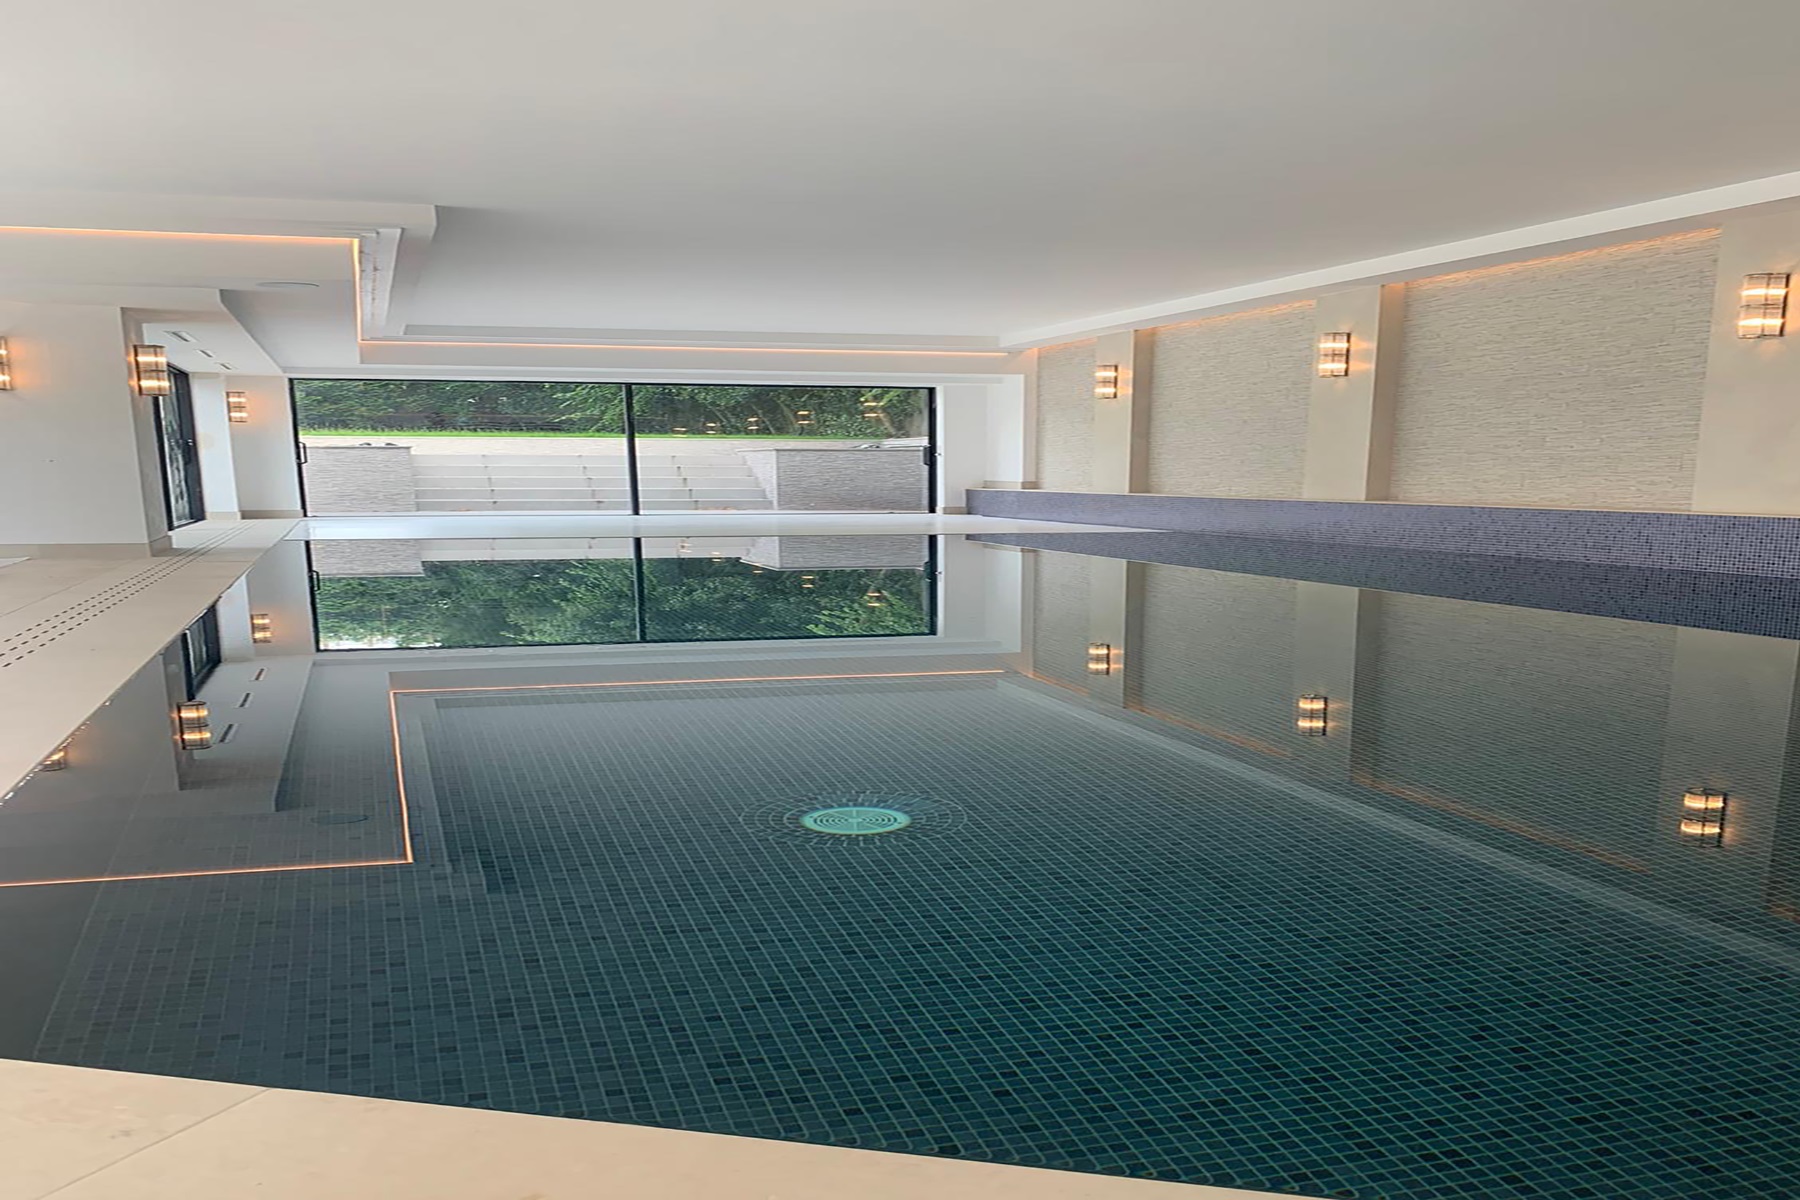 Residential indoor swimming pool